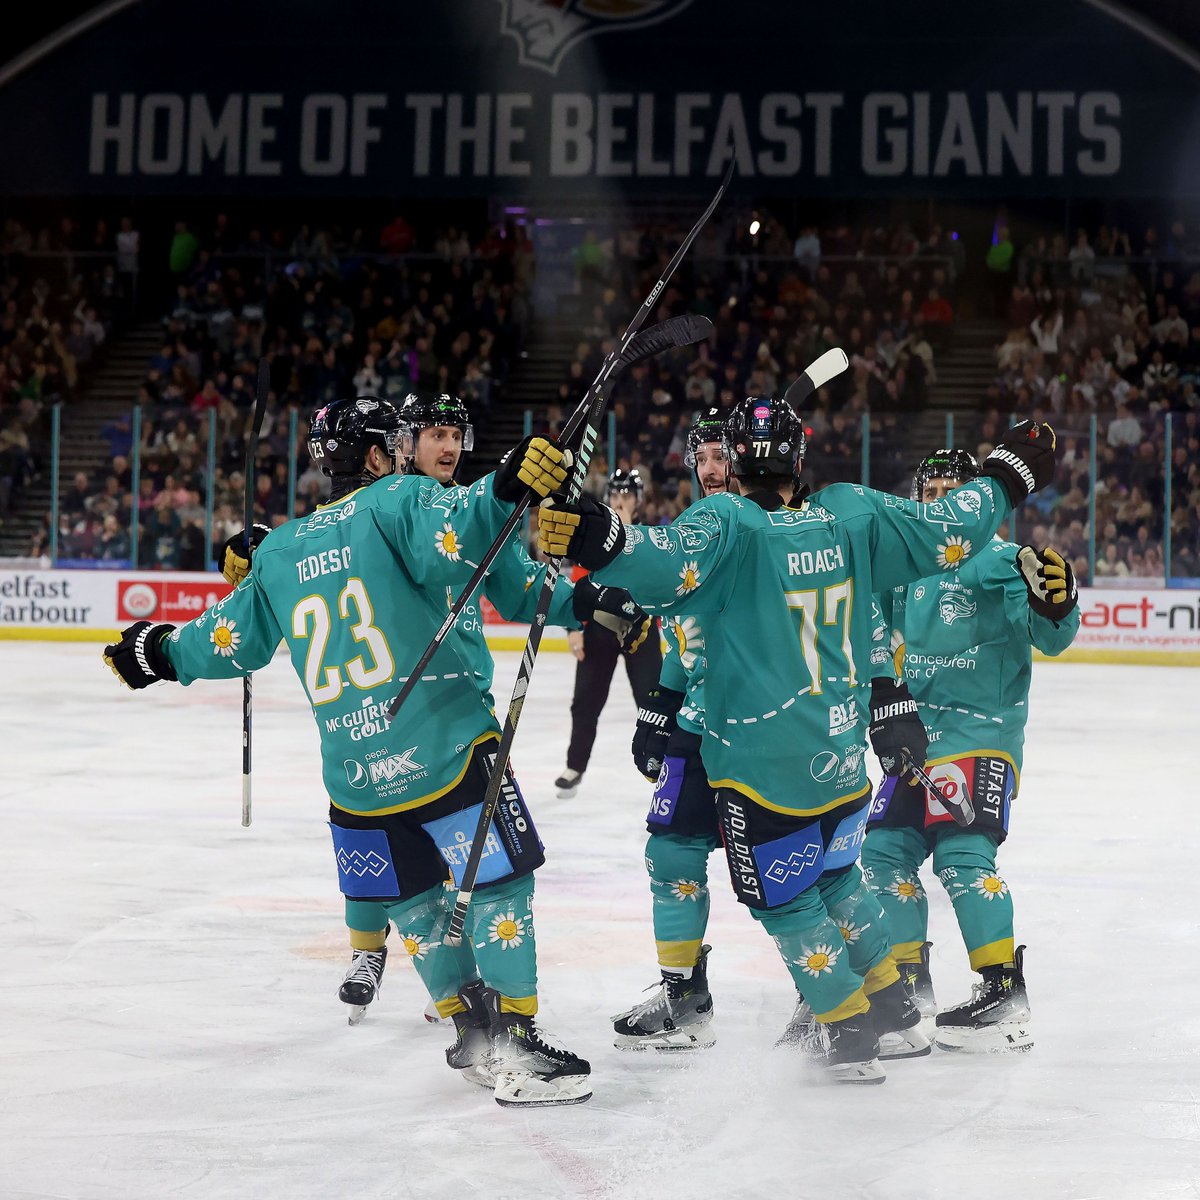 🌼 CANCER FUND FOR CHILDREN RAFFLE 🌼 Enter this GIANT raffle to win a limited edition Belfast Giants Cancer Fund for Children jersey signed by the 23/24 team. PLUS 4️⃣ tickets to the last game of the season when your Giants take on the Steelers on Sat 6th April. 🔥 (1/2)